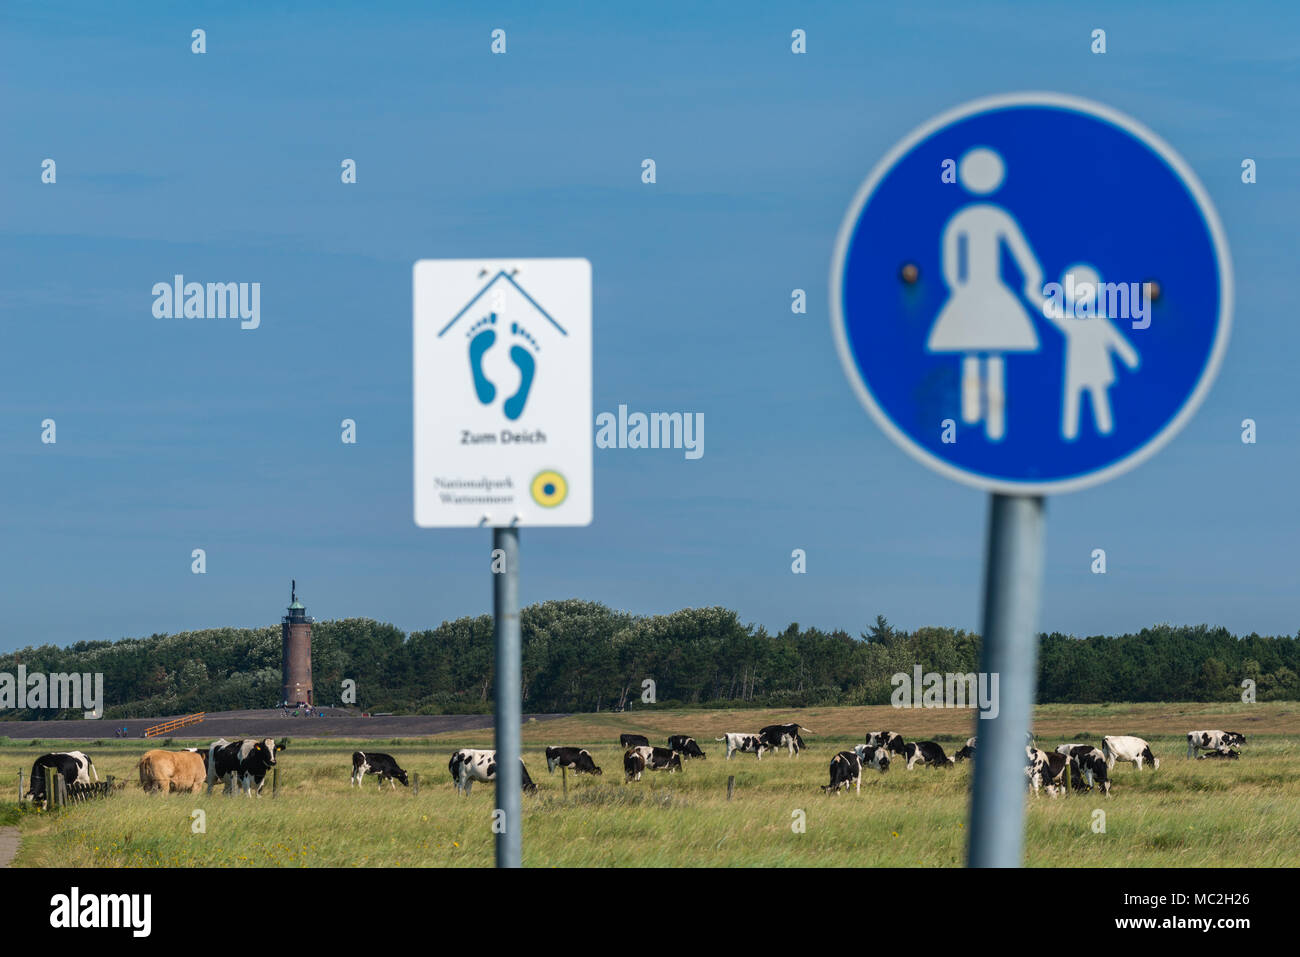 Marshes with  grazing cattle, St. Peter-Ording, Nordfriesland, Schleswig-Holstein, Germany, Europe Stock Photo